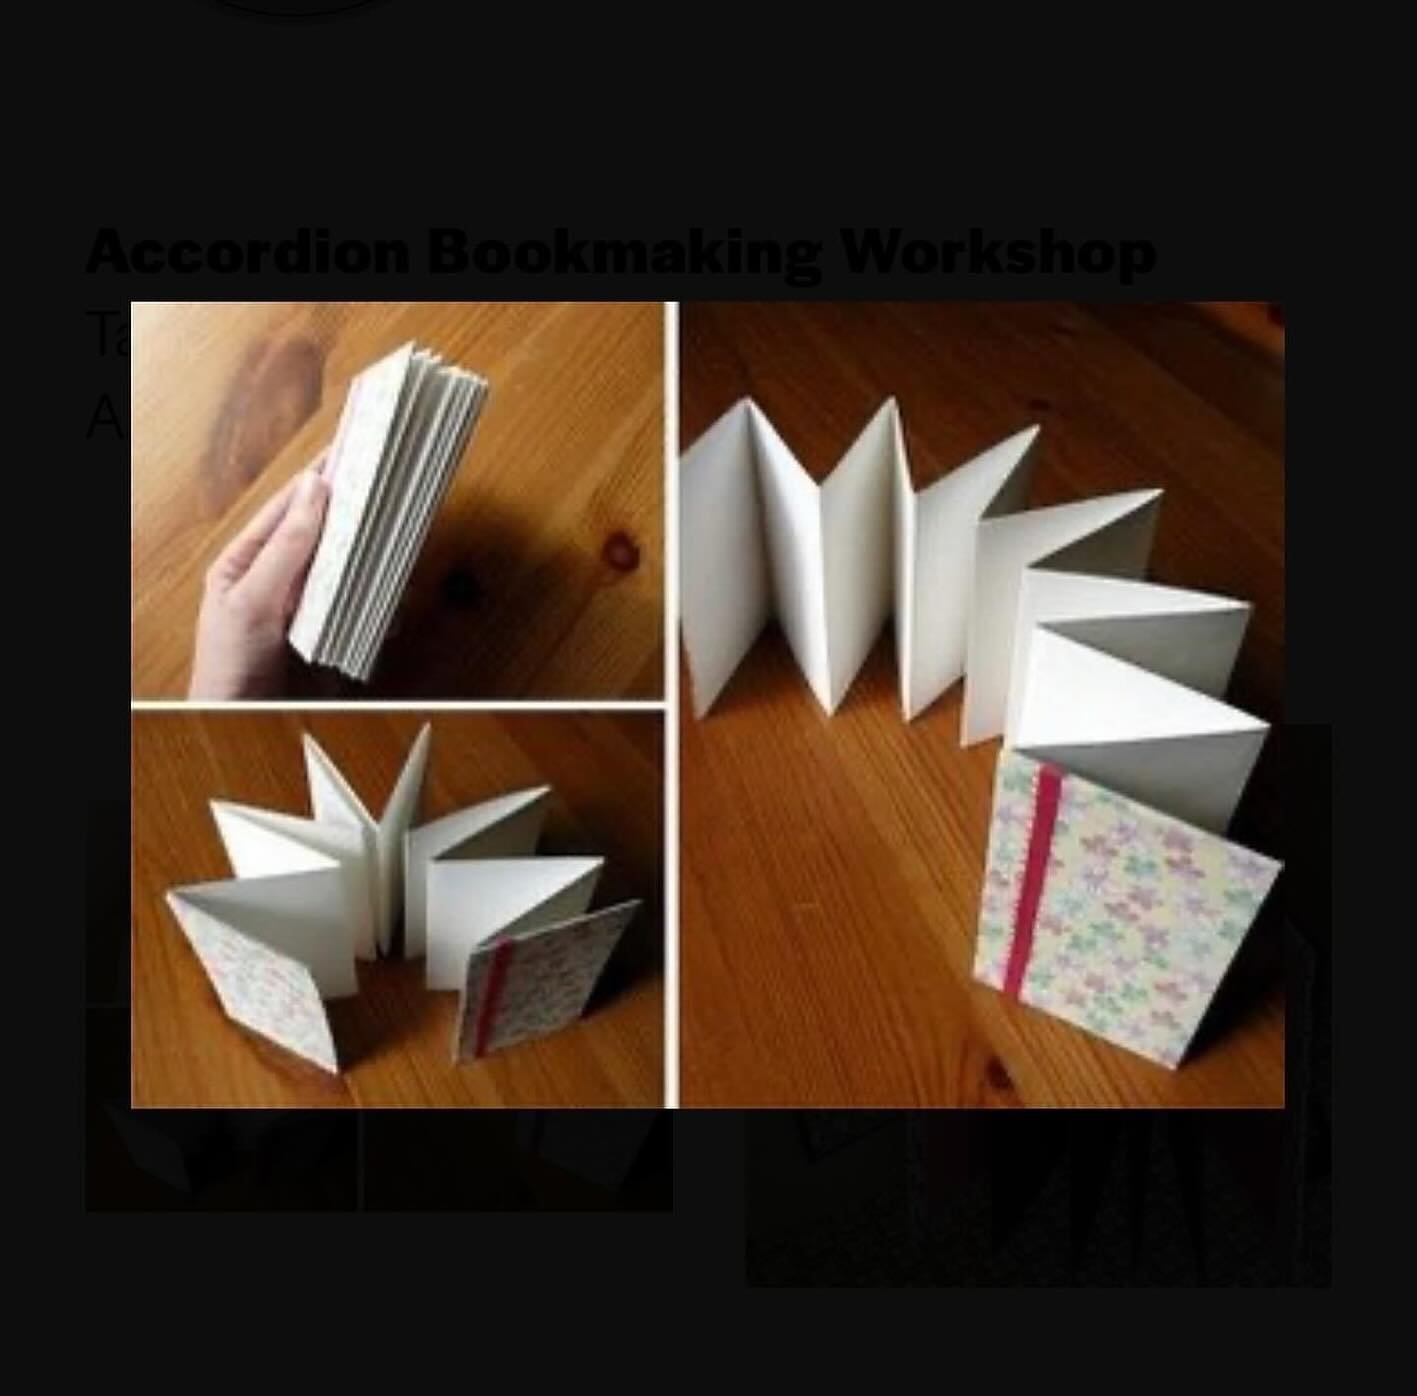 This Saturday from 1-4pm! Join us for an Easy and Fun Accordion Bookmaking Workshop, Taught by @terri_thoman Thoman, Owner of Paper Arts Dallas and Dallas Artisan Fine Print @paperartsdallas 

Accordion fold books are one of the most common structure